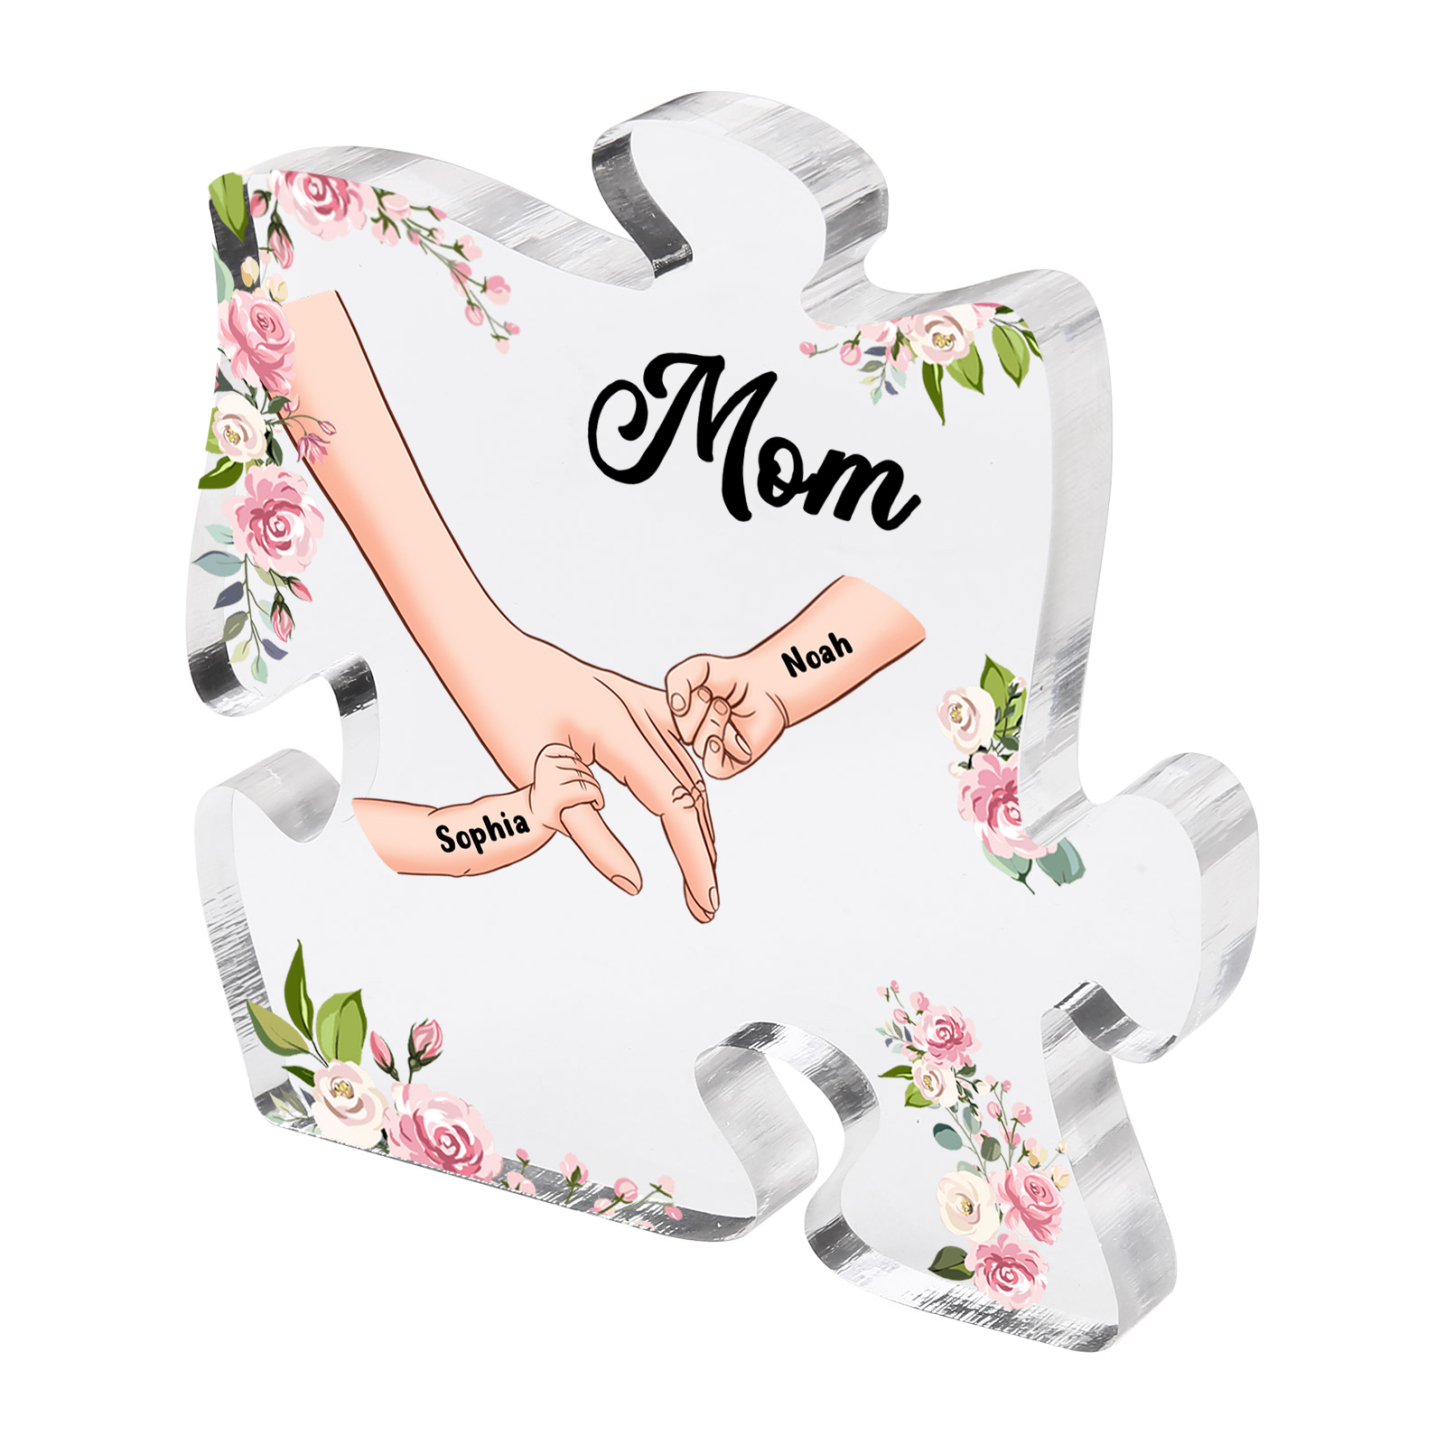 2 Name - Personalized Acrylic Heart Keepsake Customized Name Holding Hands Acrylic Plaque Ornament Mother's Day Gift for Mom